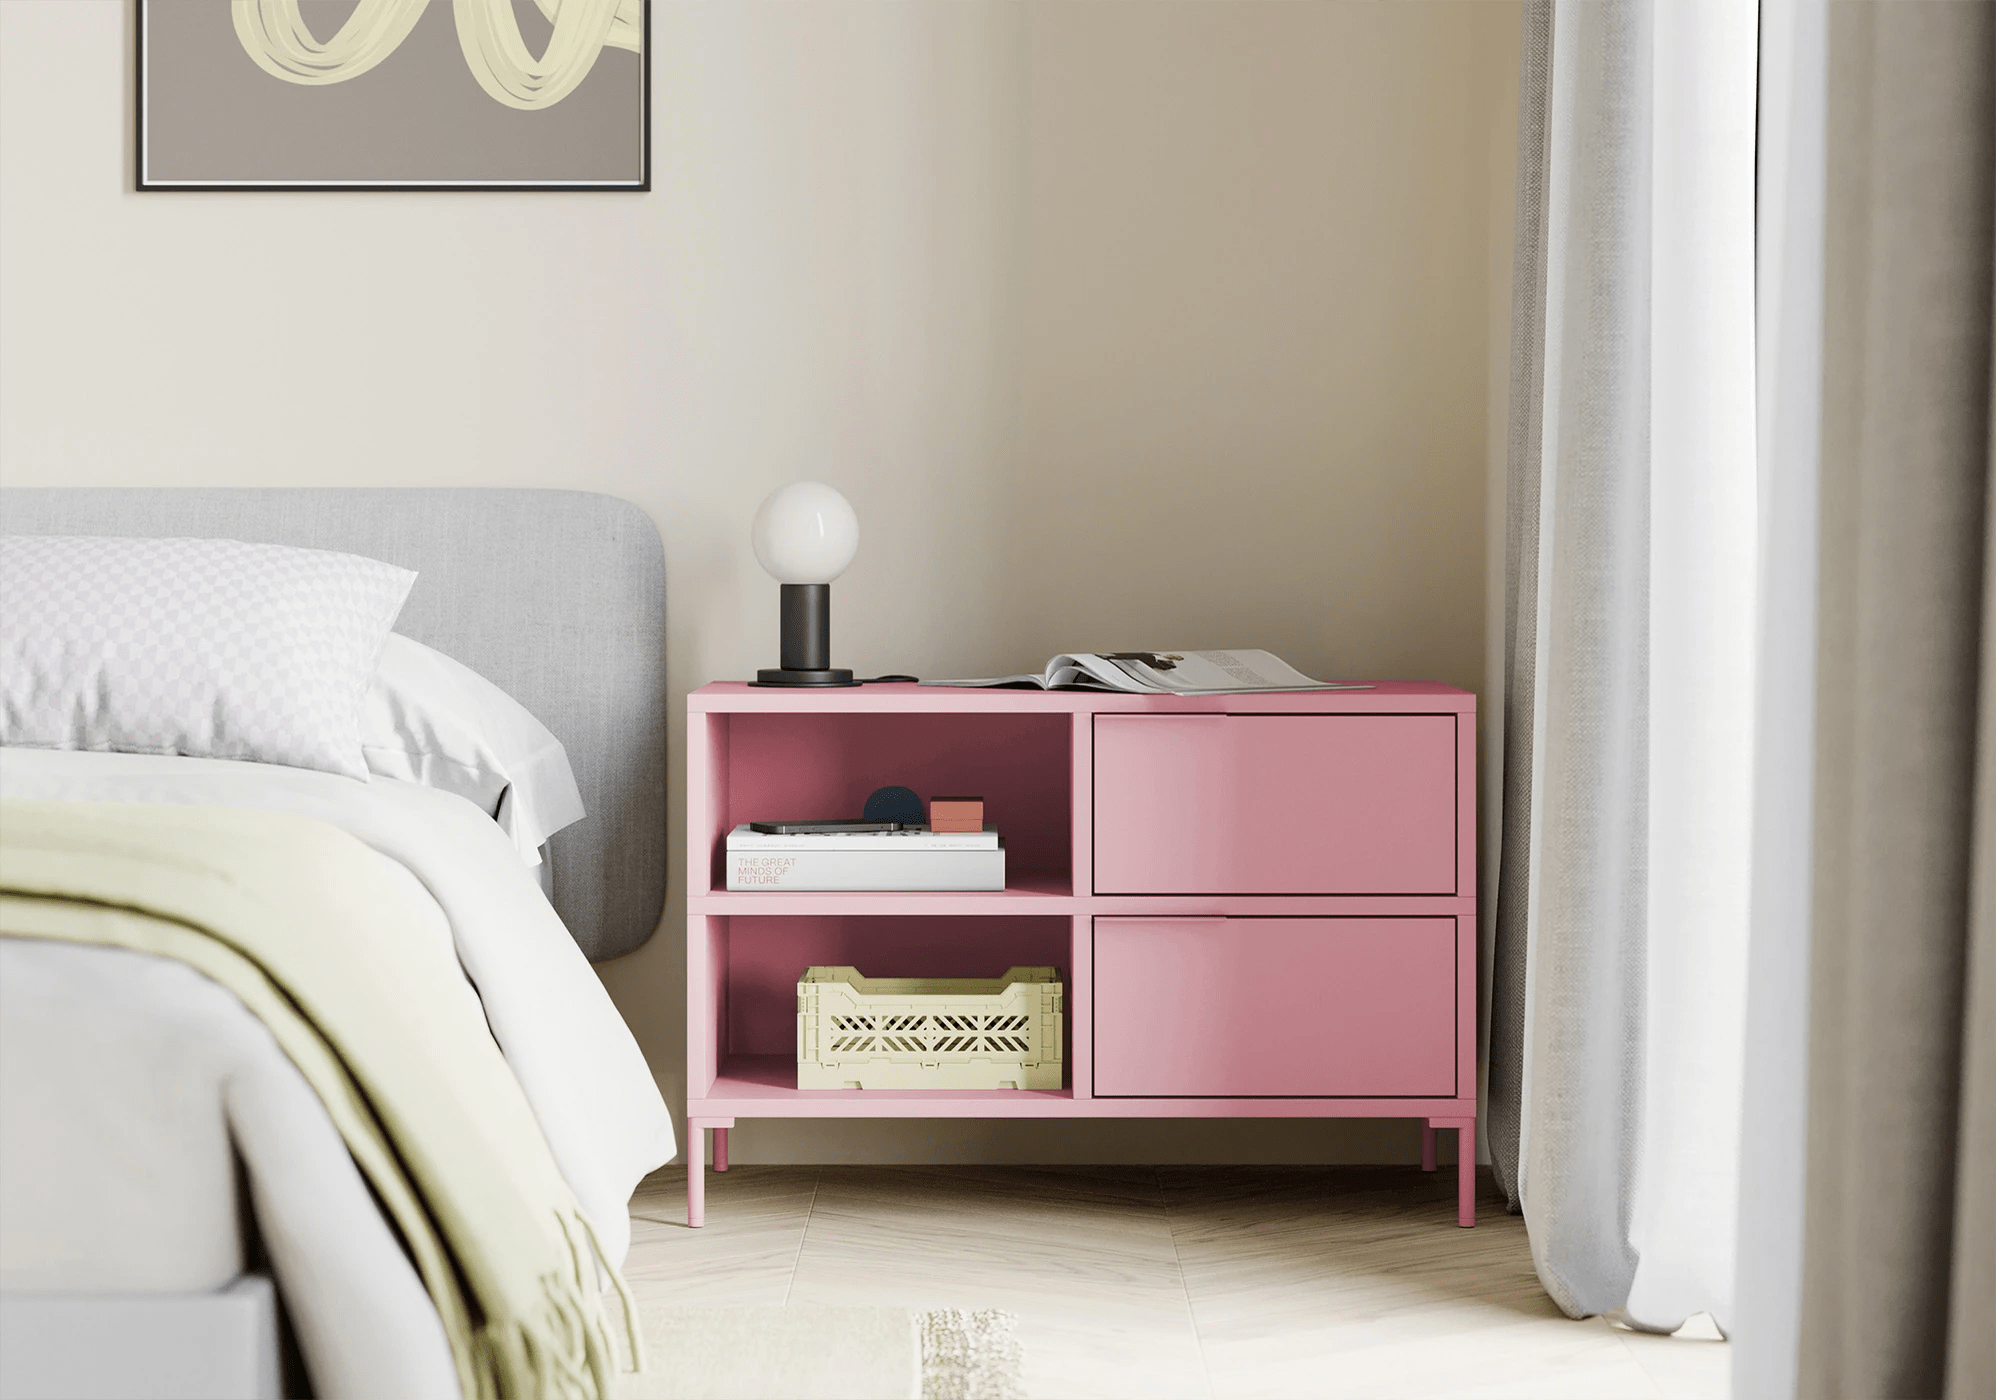 Large Reisinger Pink Bedside Table with Drawers, Backpanels and Legs - 78x53x40cm 3